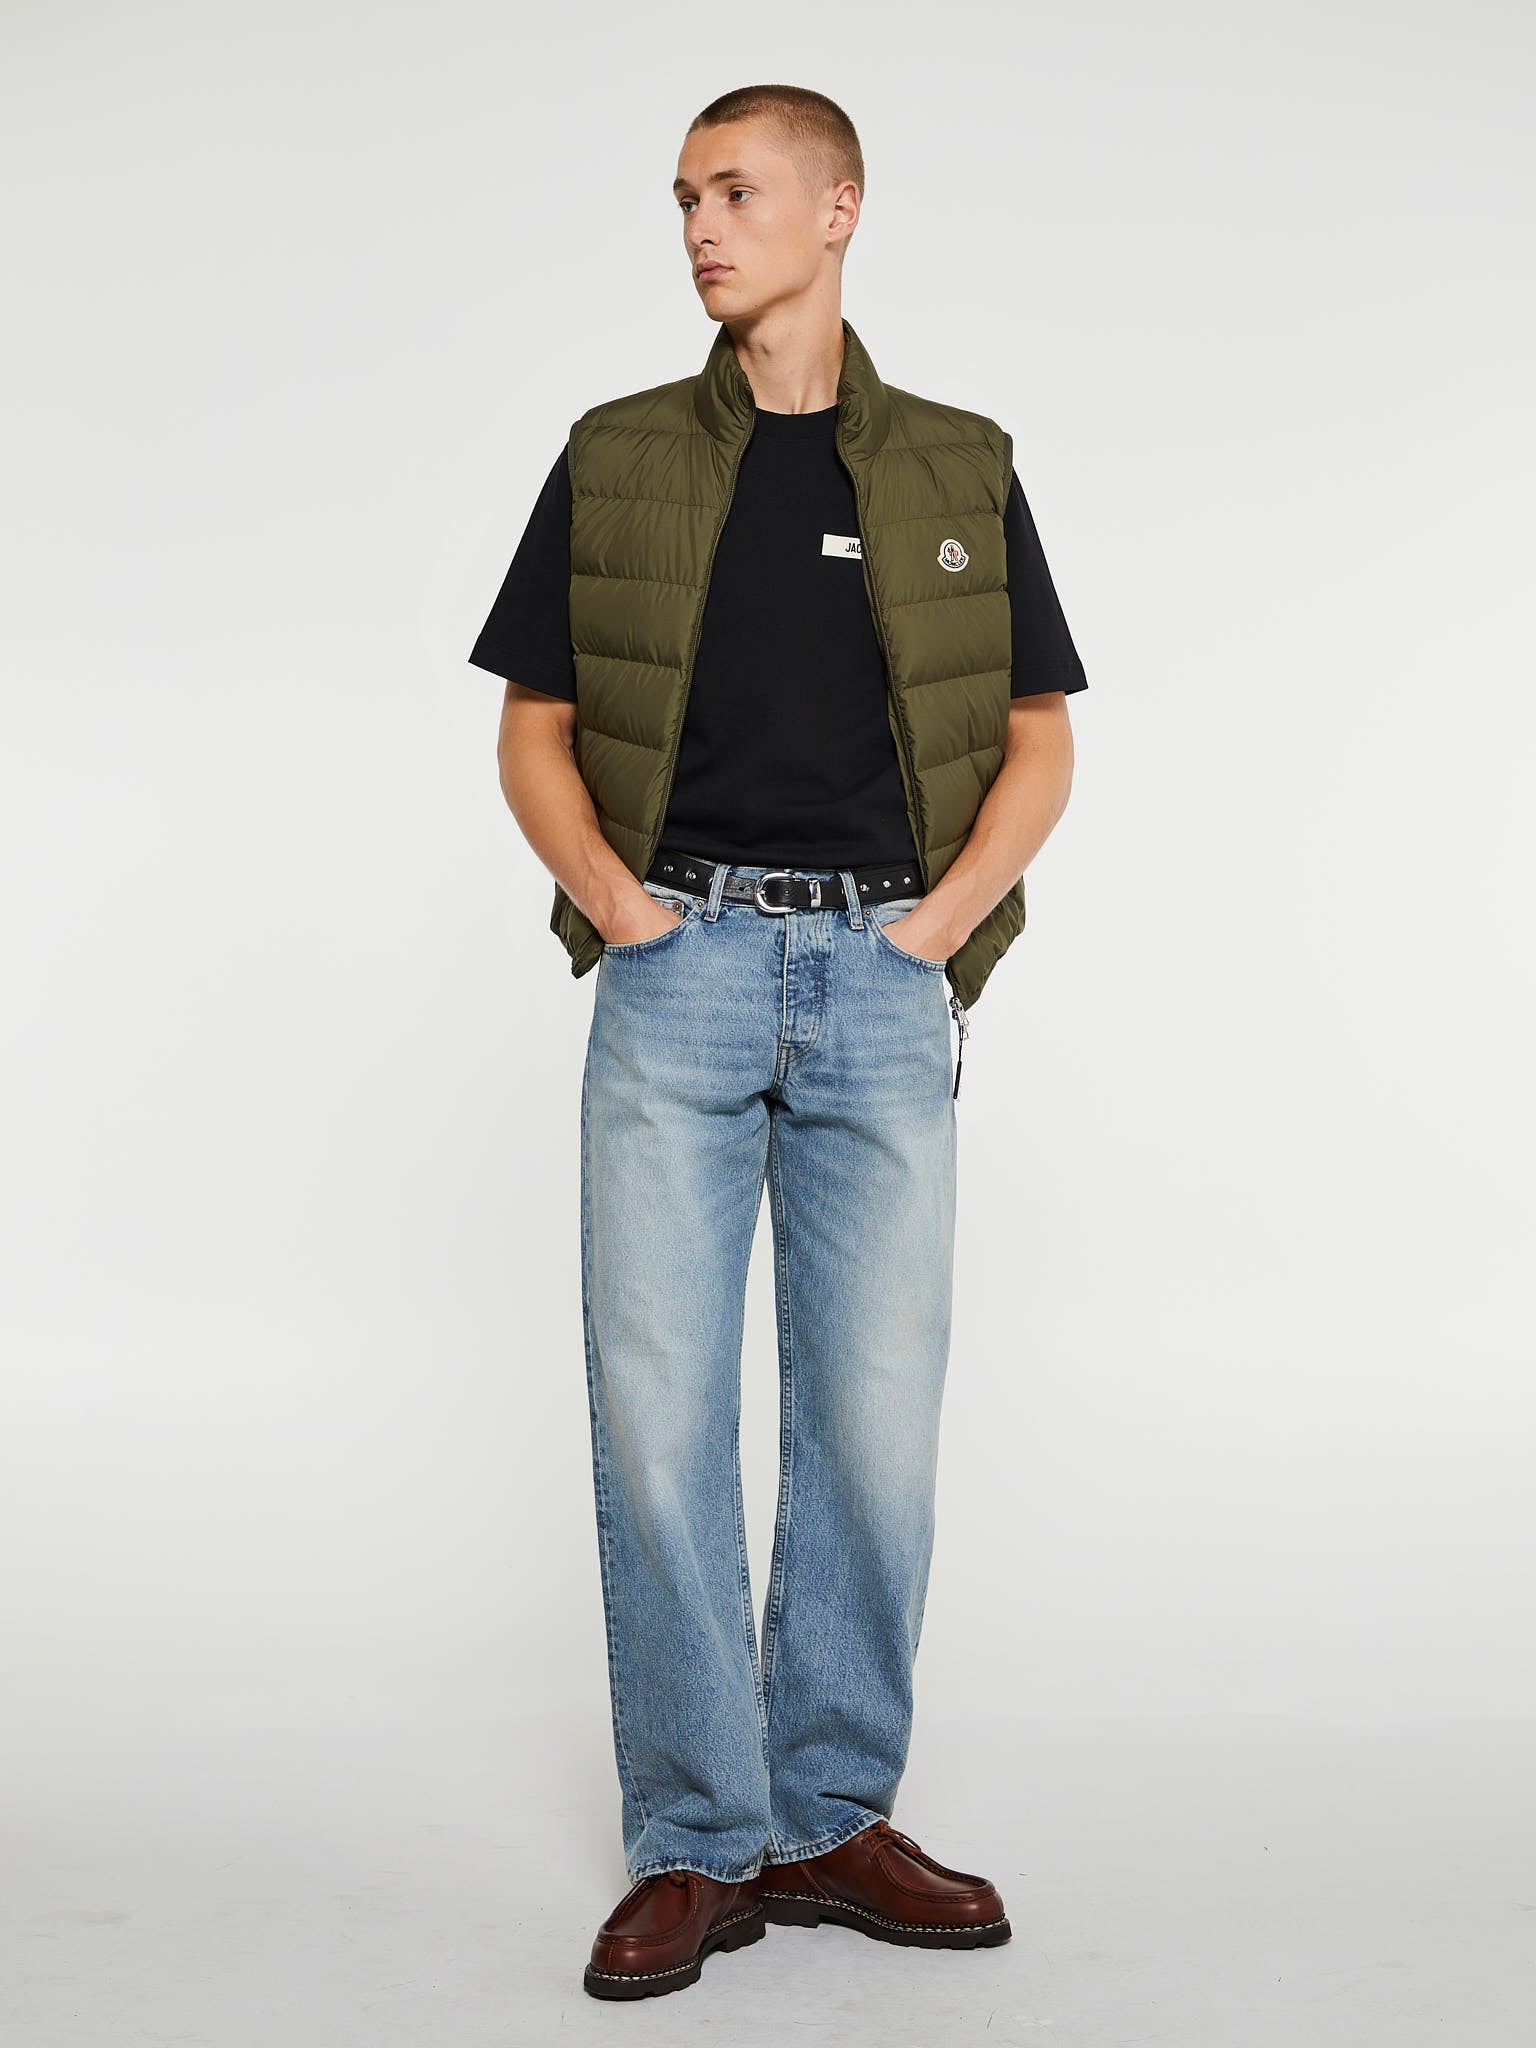 Contrin Vest in Olive Green